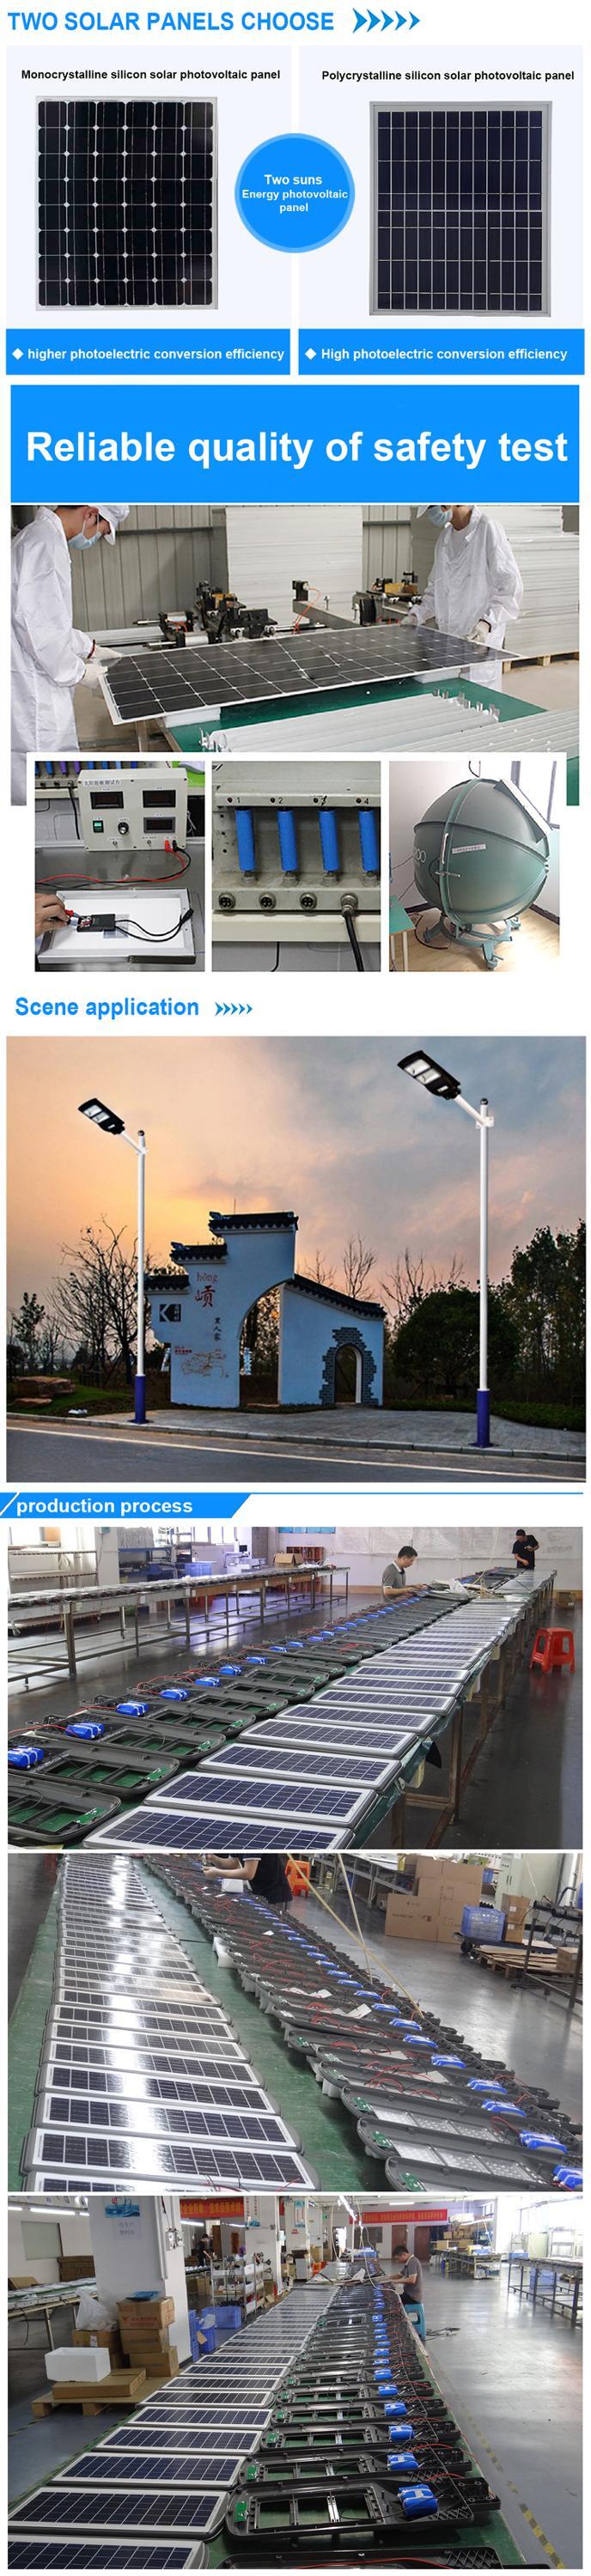 cheap houses price outdoor lighting suppliers power panel cells charger saving lamp IP66 led solar energy systems led street light